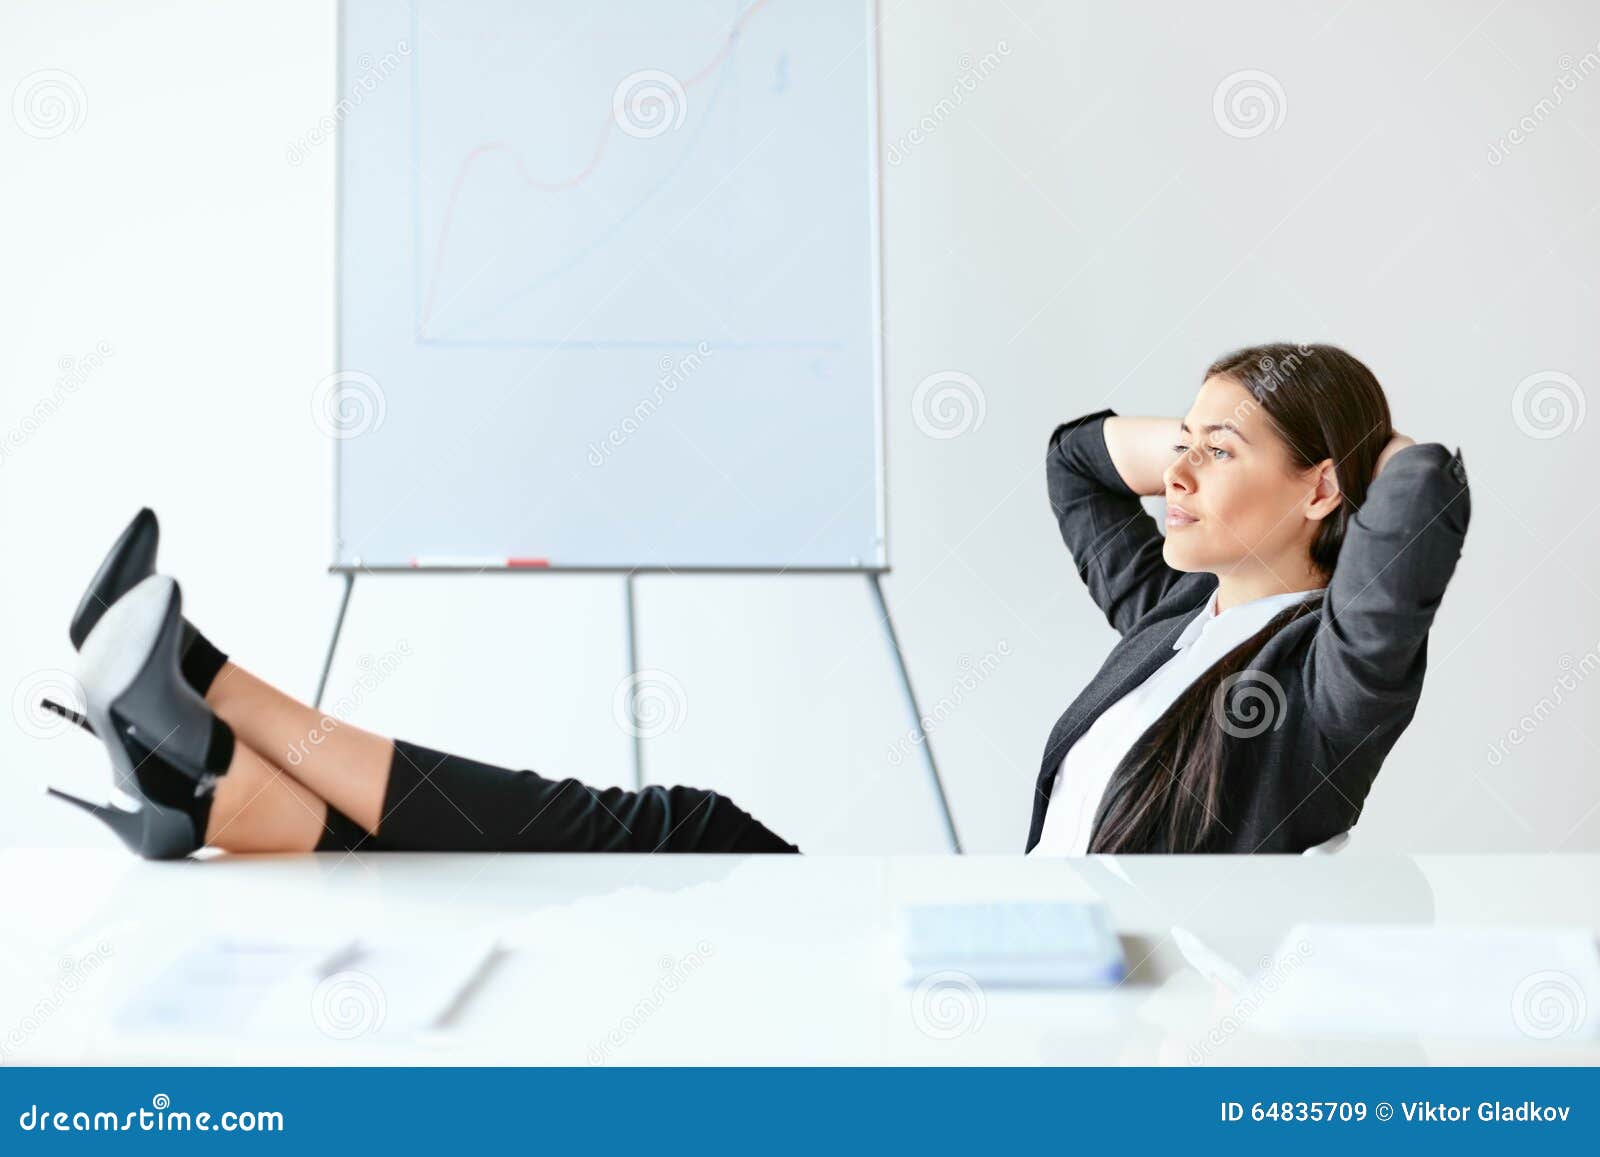 portrait of relaxed business woman sitting with legs on desk